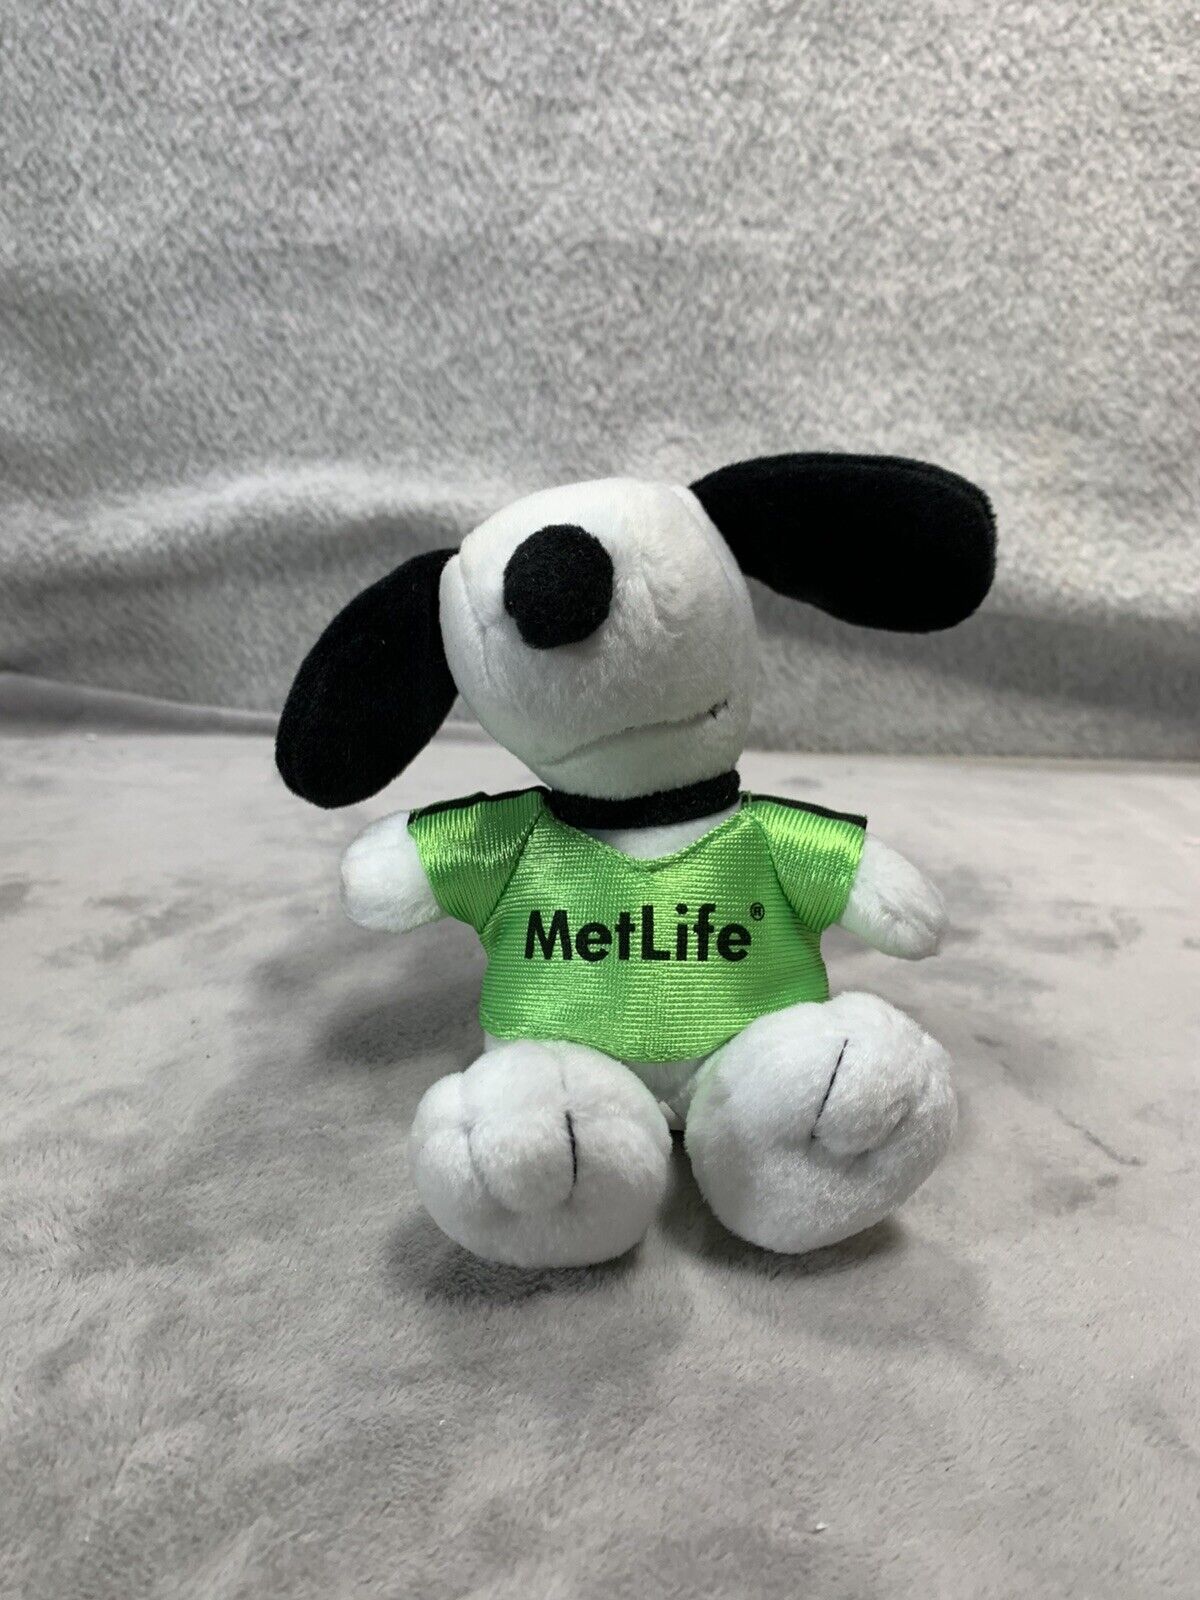 Met Life Peanuts Snoopy Plush - Soccer Promotional Item Missing Soccer Ball